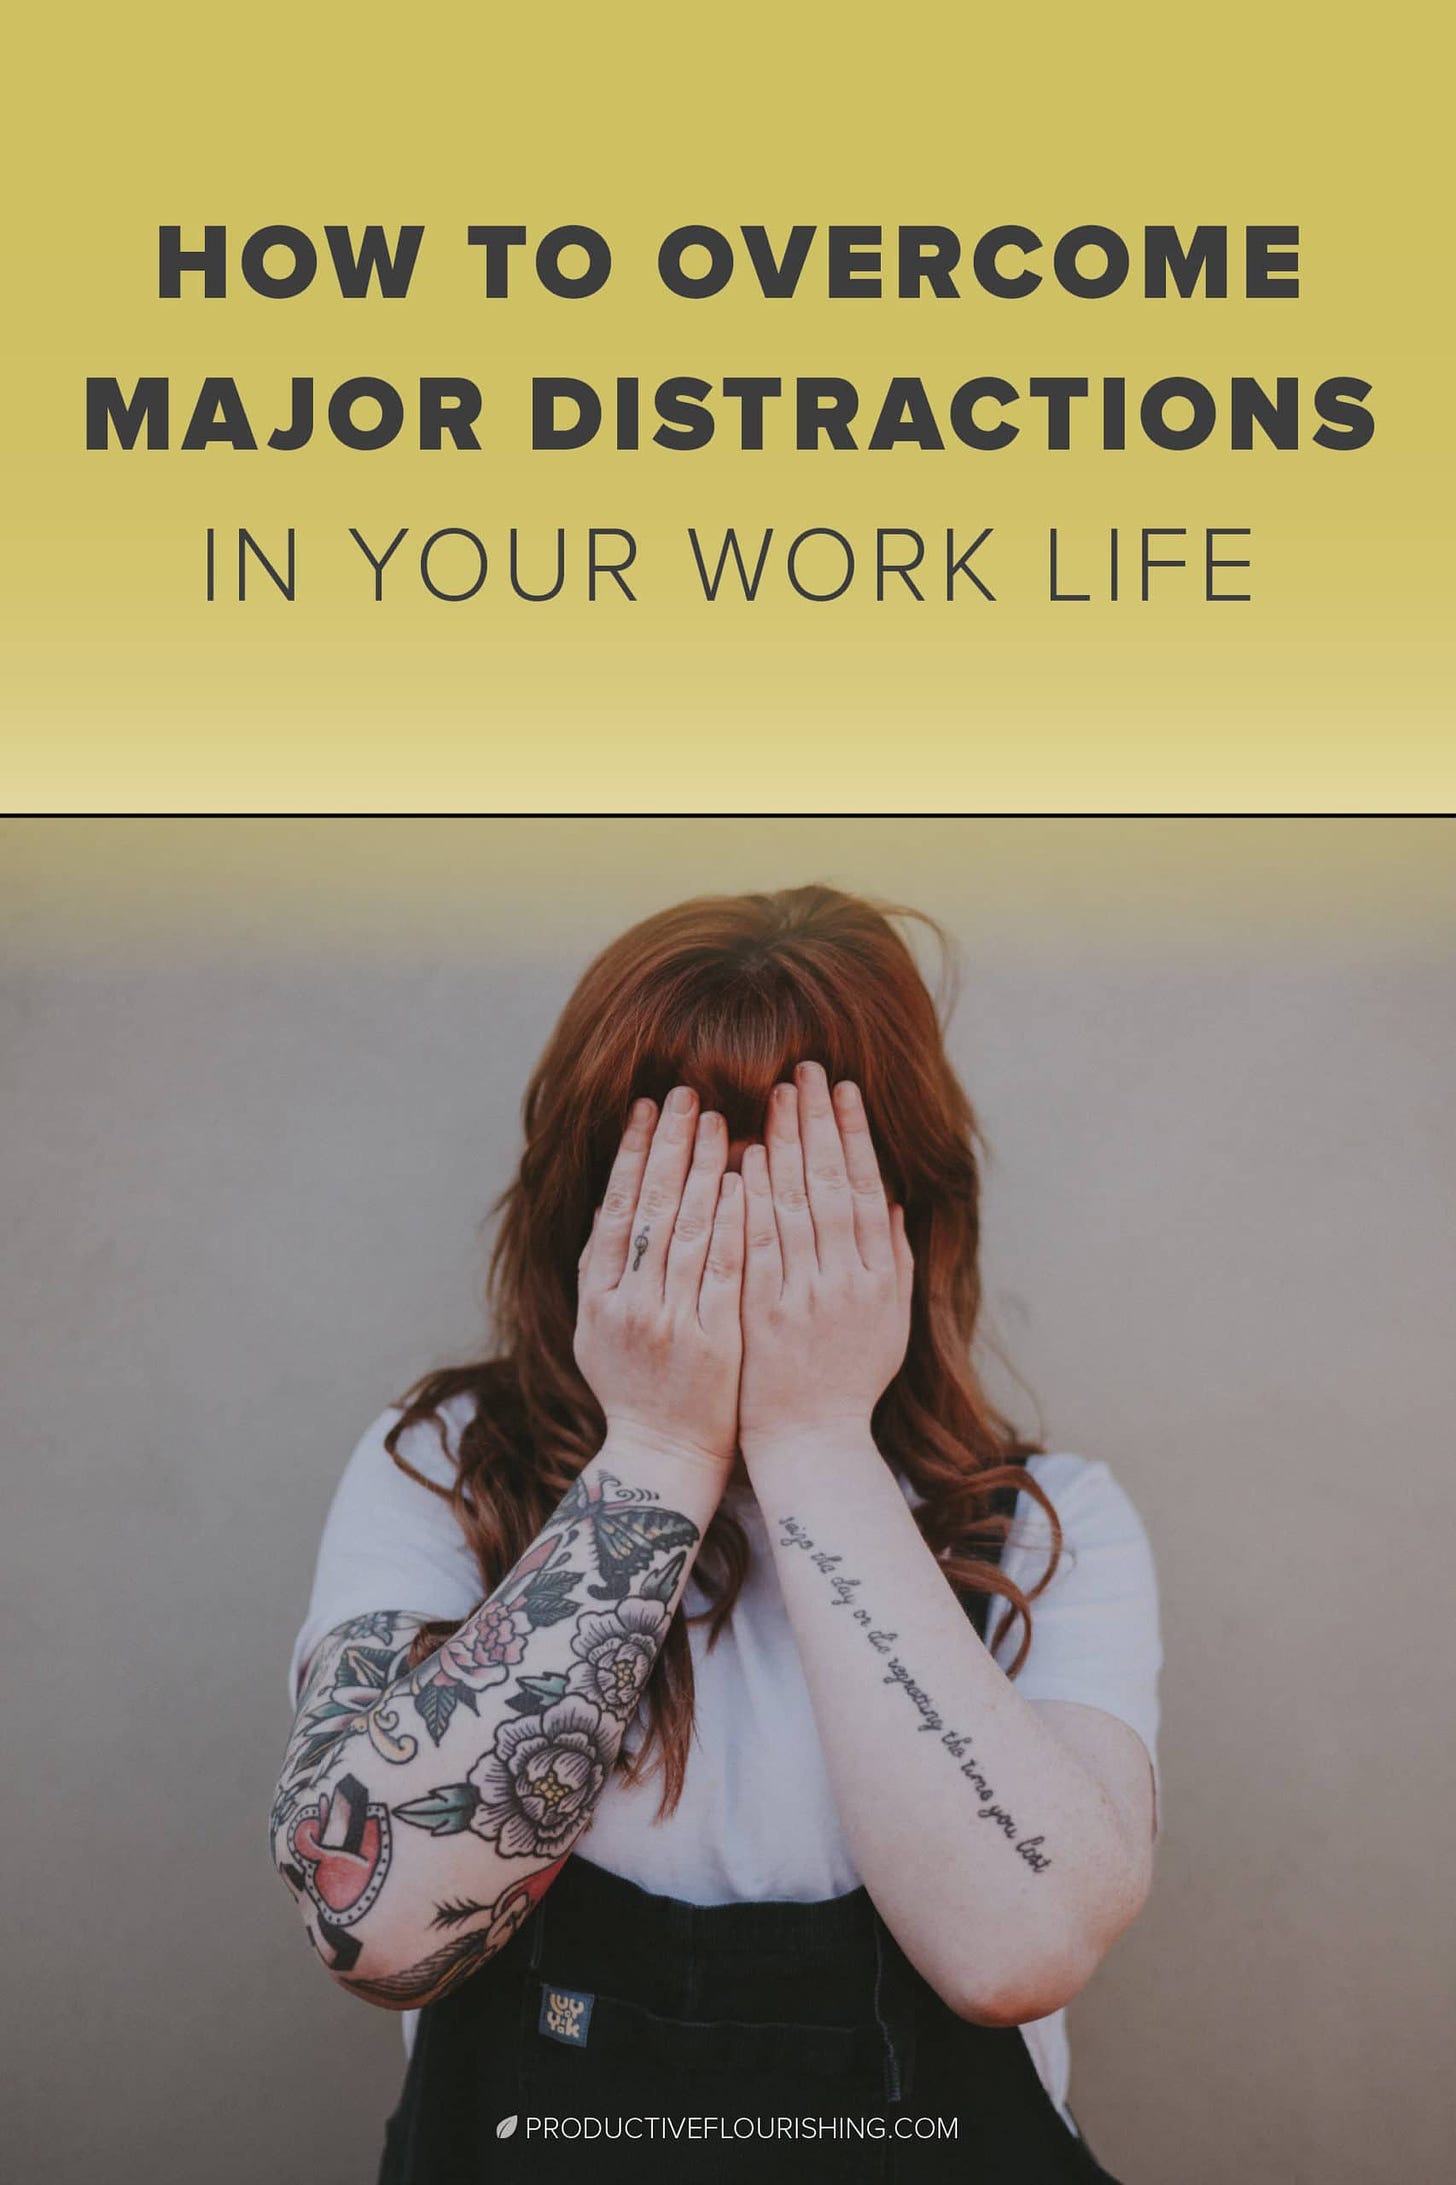 How To Overcome Major Disruptions In Your Work Life: A guest post by Jenn Labin. Tips on how to bounce back professionally when big events happen in our life. The key to resilience and how to practice this skill when personal experiences wreak havoc on our productivity at work. #resilienceatwork #worklifebalance #productiveflourishing